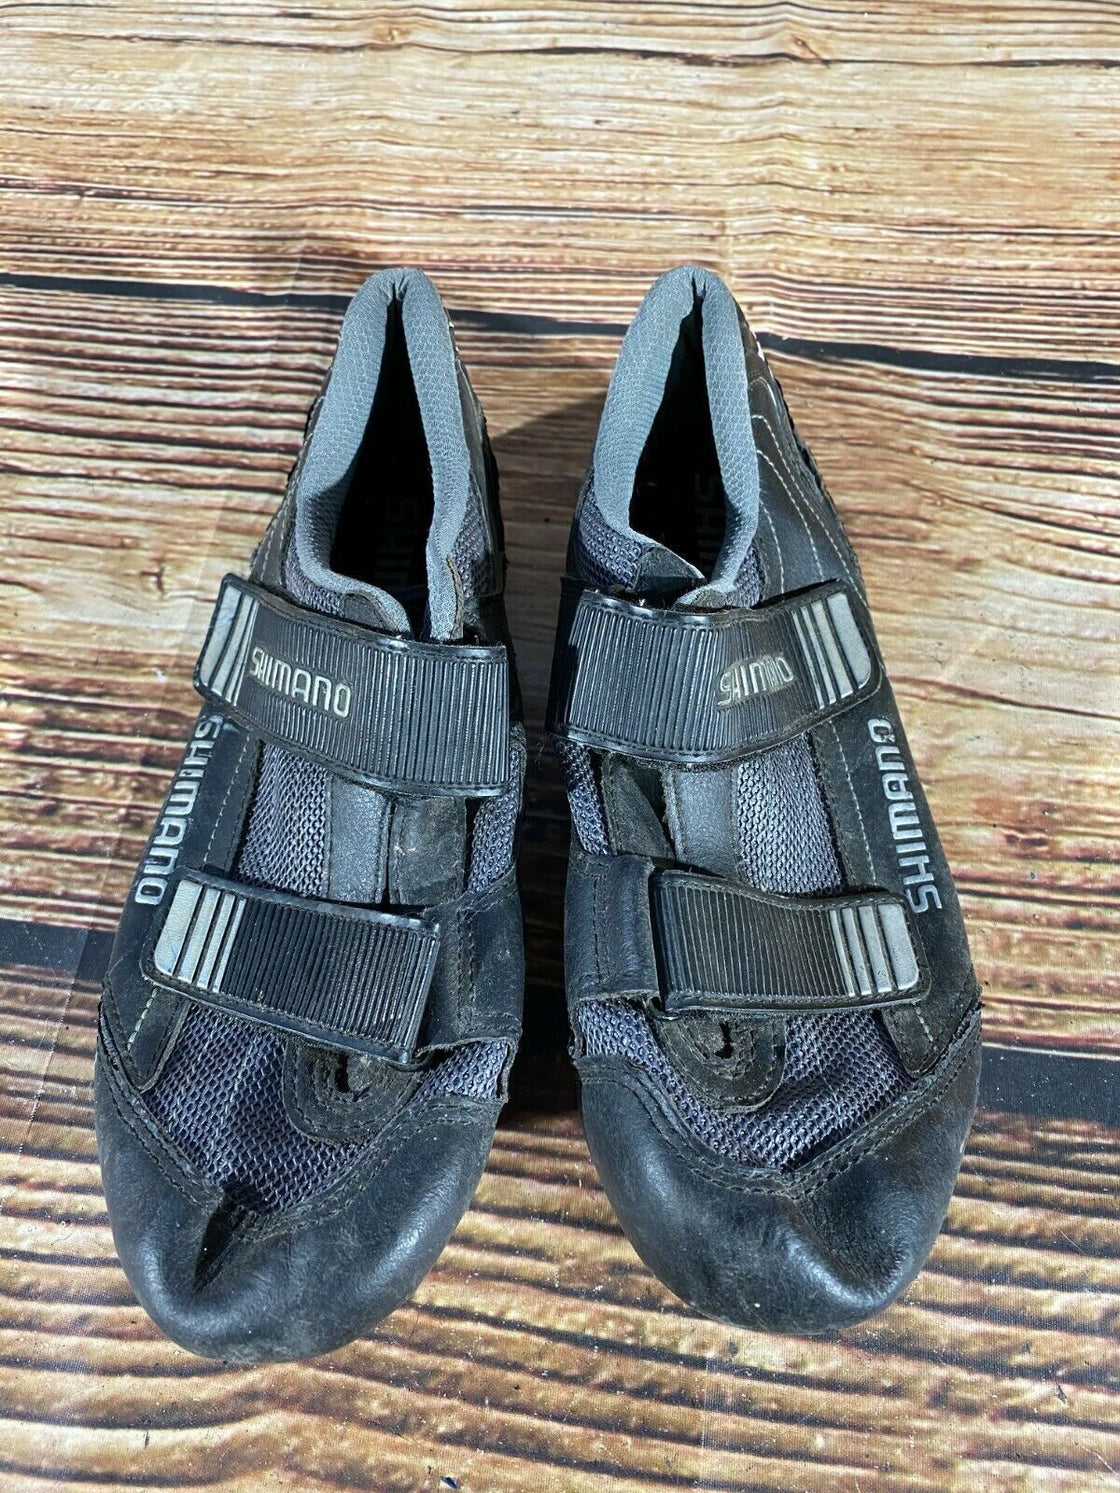 SHIMANO R078 Road Cycling Shoes Clipless Biking Boots Size EU 41 with Cleats